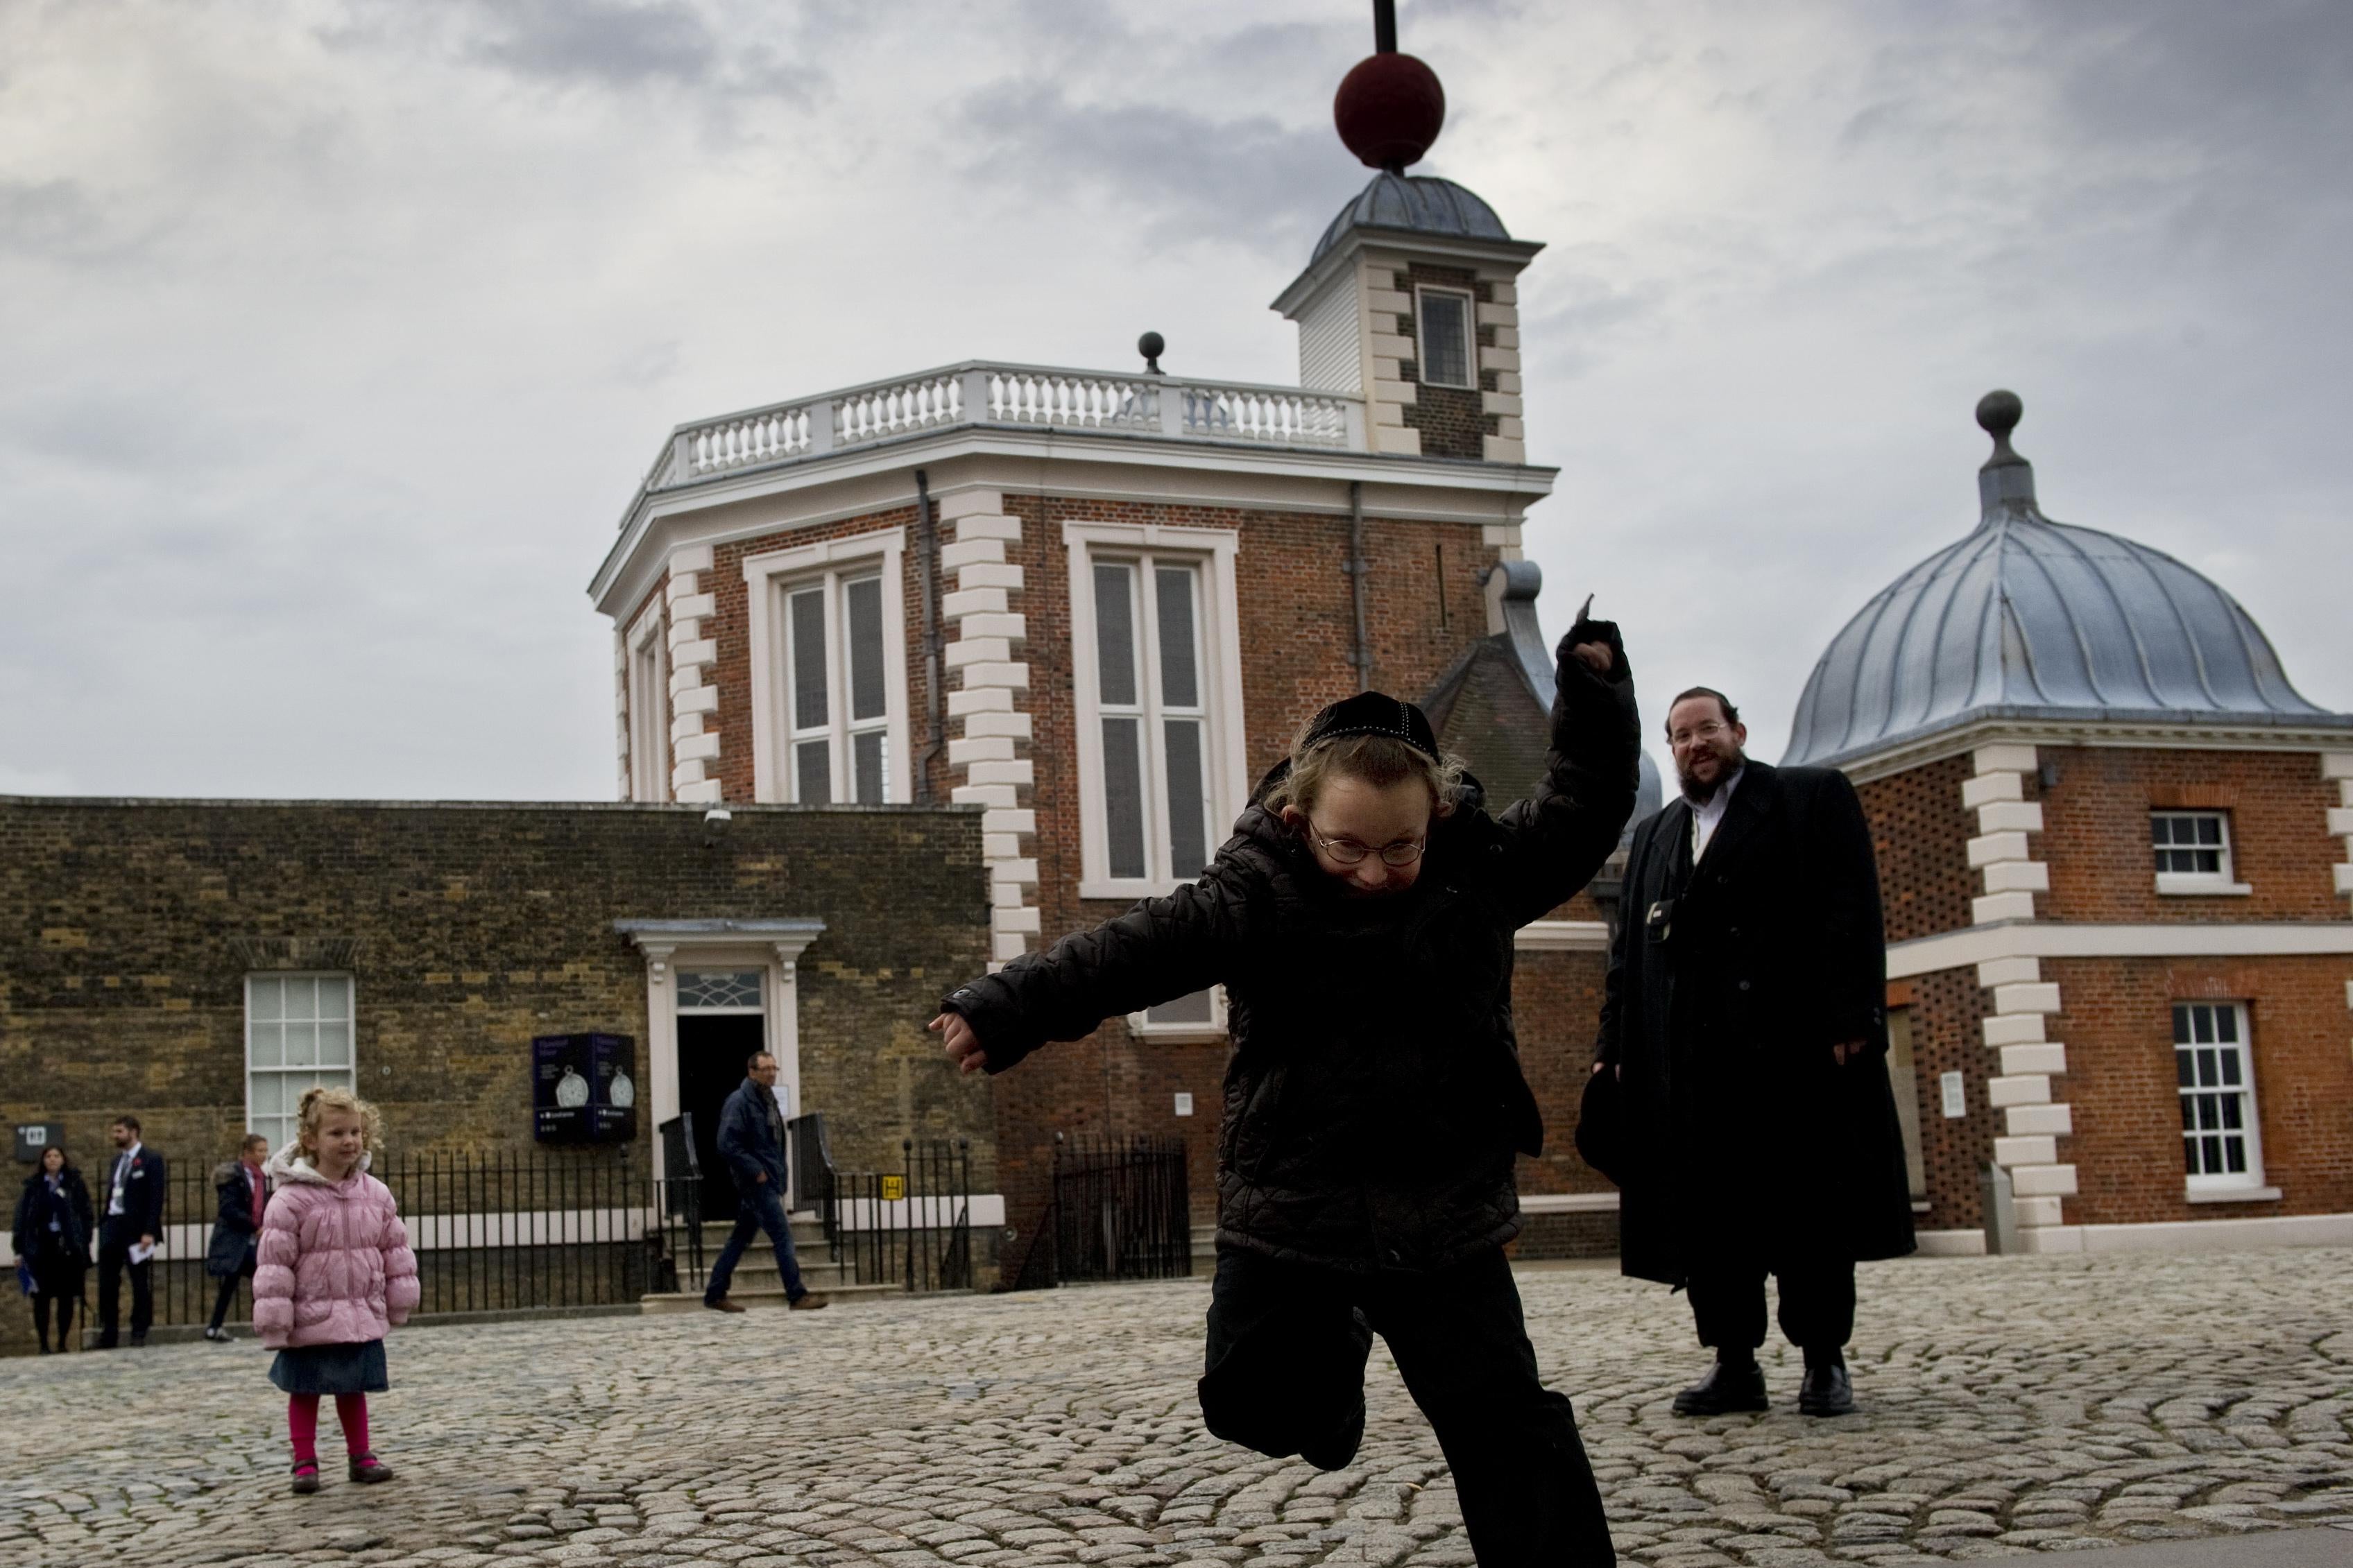 A tourist jumps over the Prime Meridian line at the Royal Observatory in Greenwich, London.